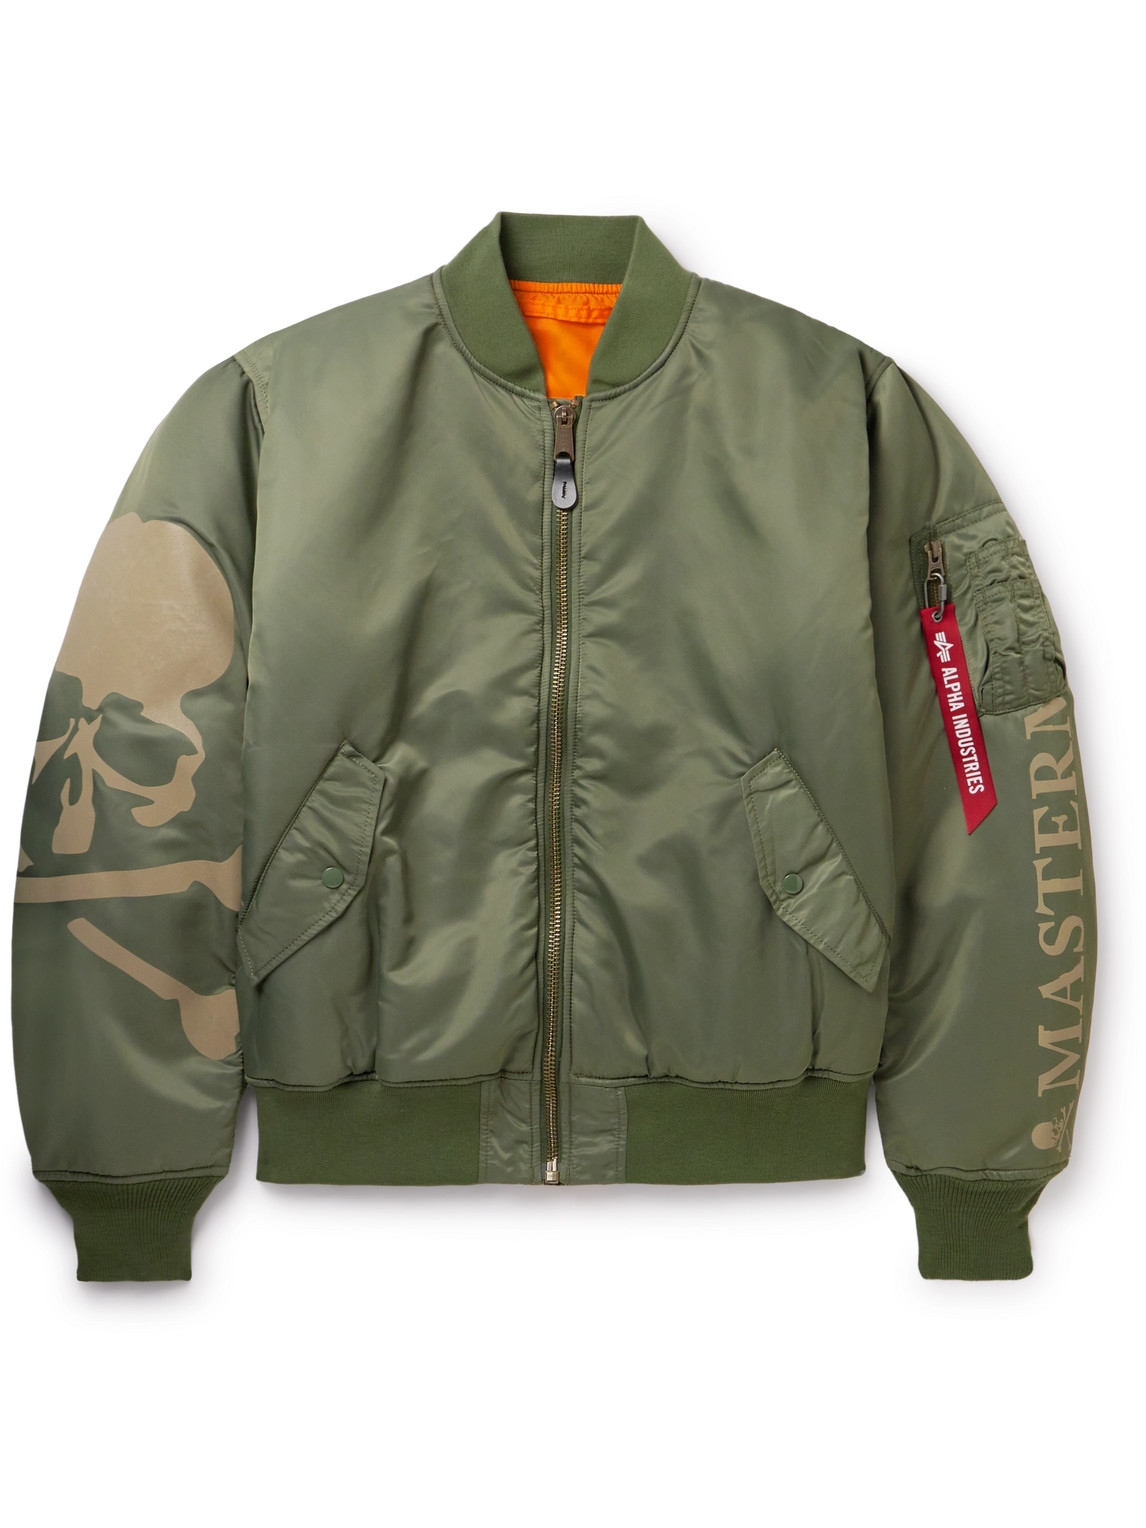 Alpha Industries Jackets for Men - Shop Now on FARFETCH